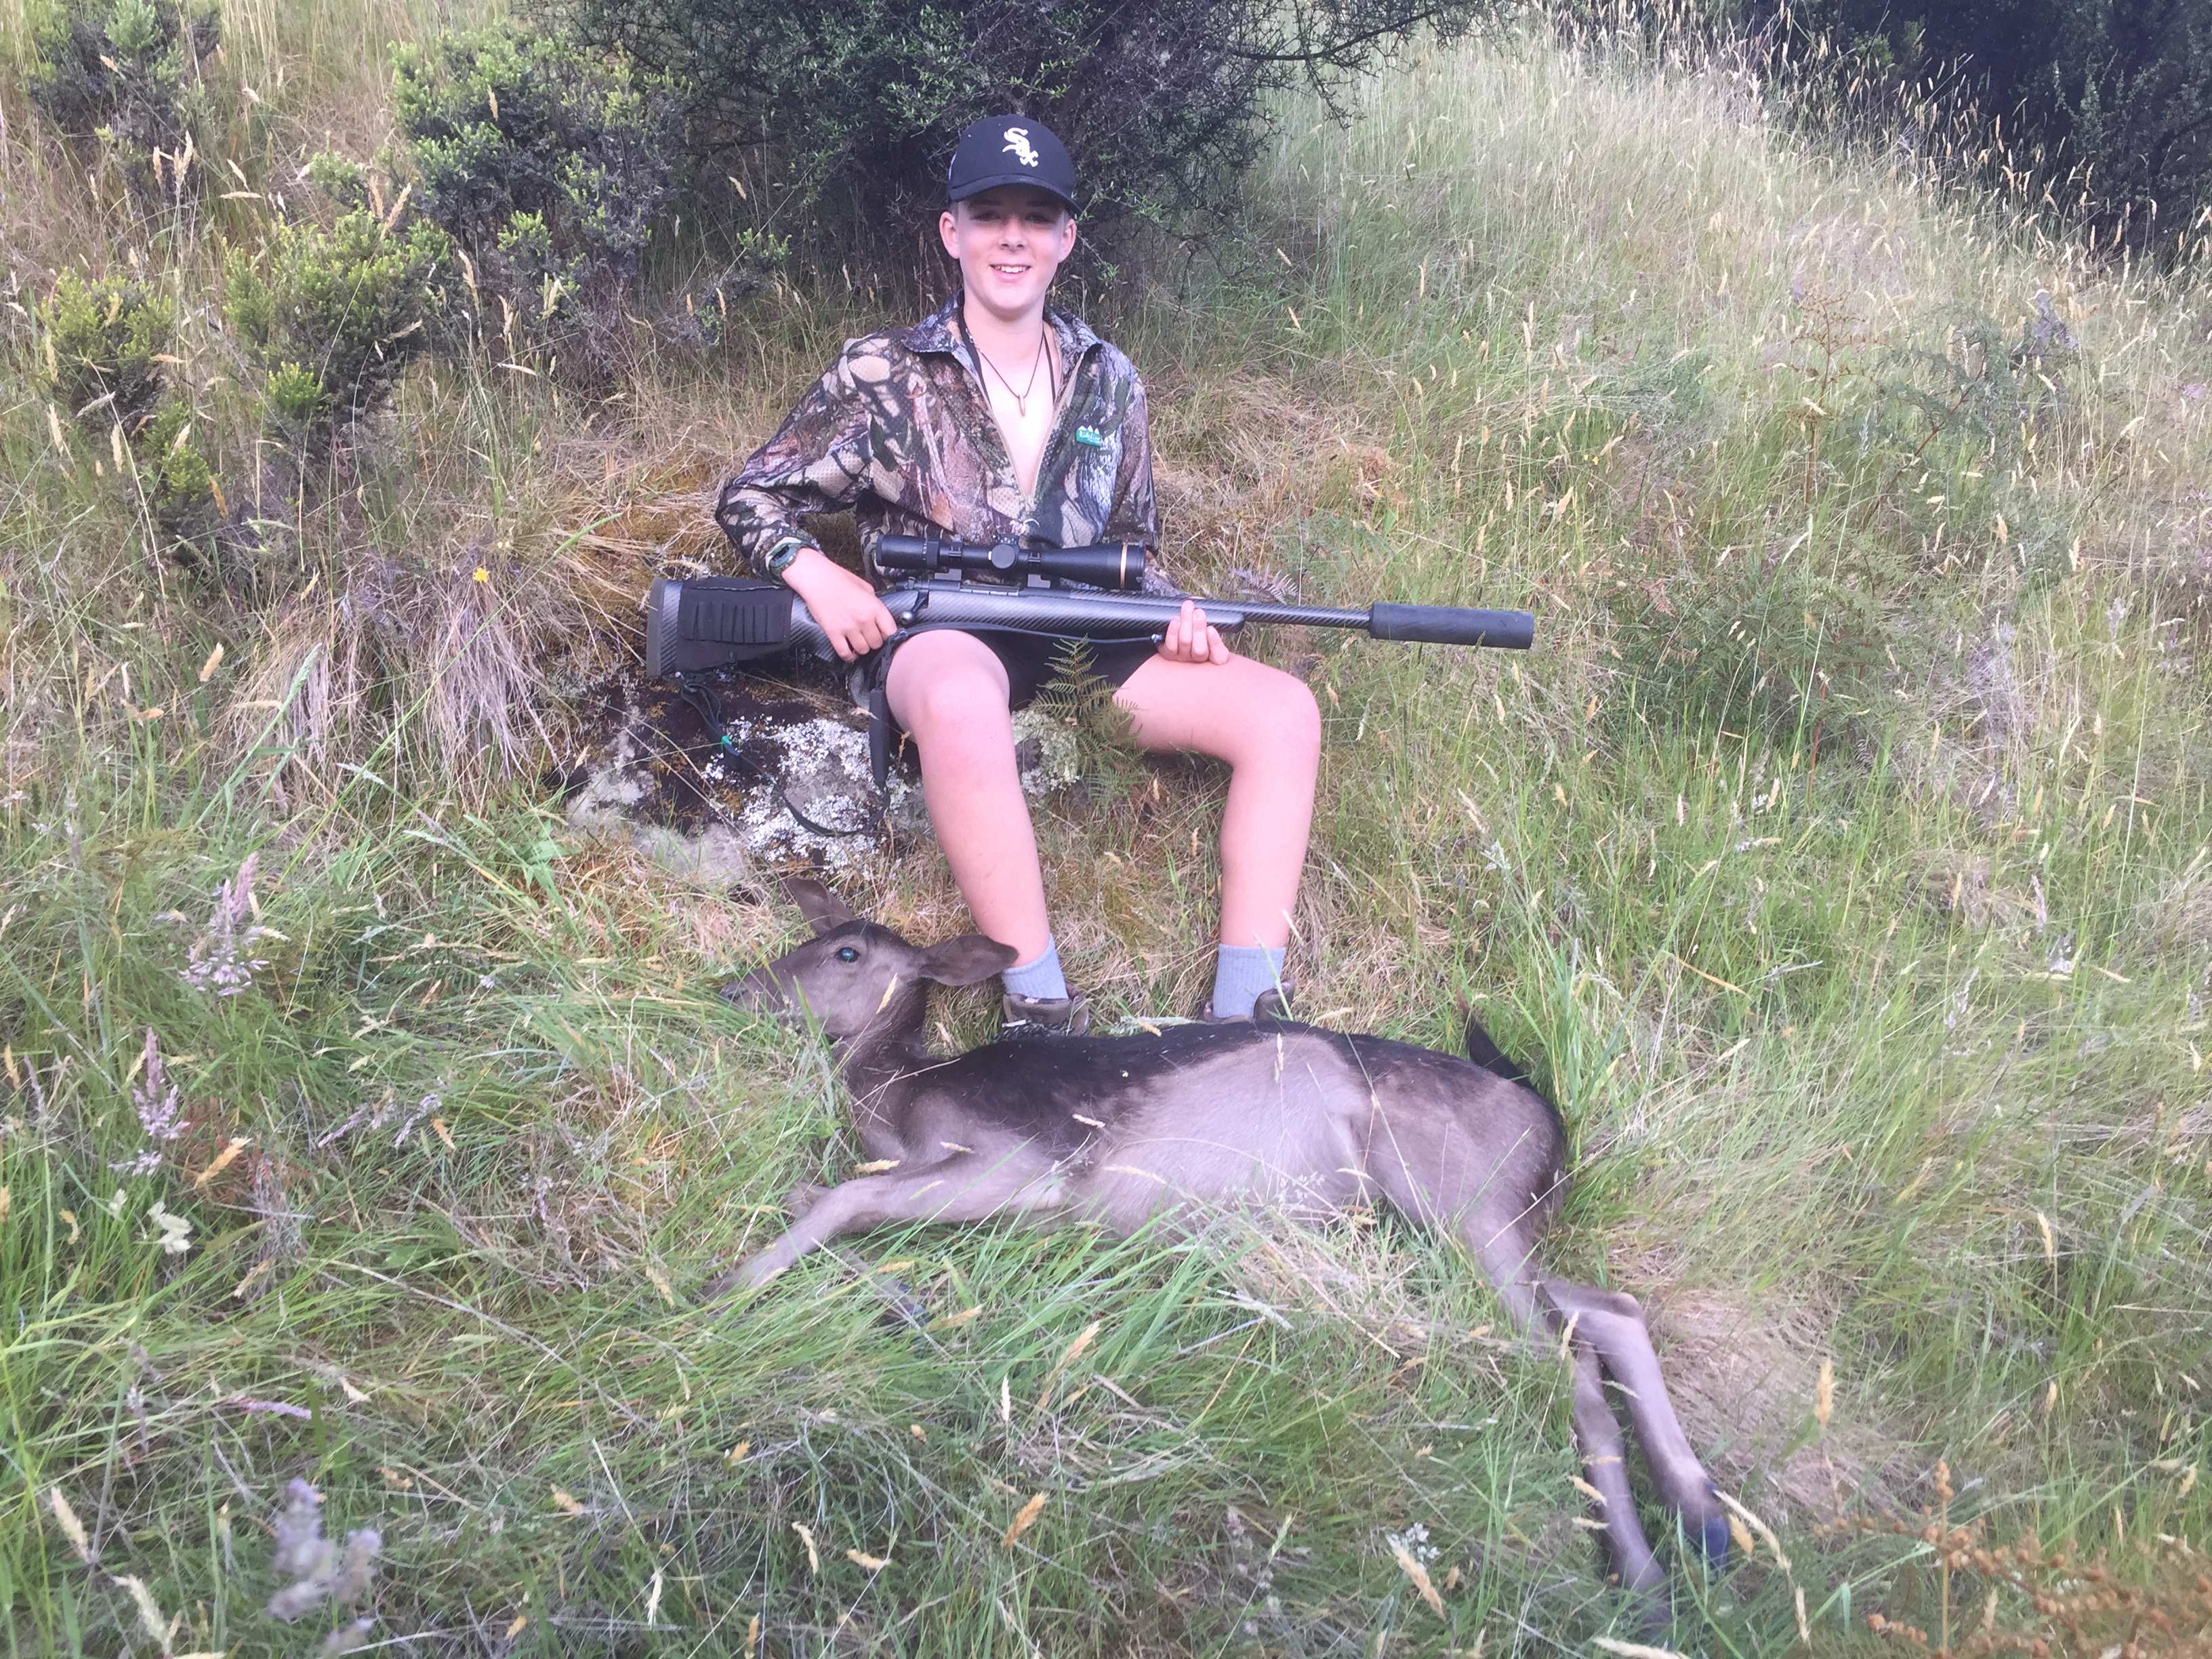 https://www.nzhuntingandshooting.co.nz/attachments/f12/240247d1703537387-ultimate-xmas-present-grandson-obsessed-hunting-rb-21-dec-23-2-.jpg